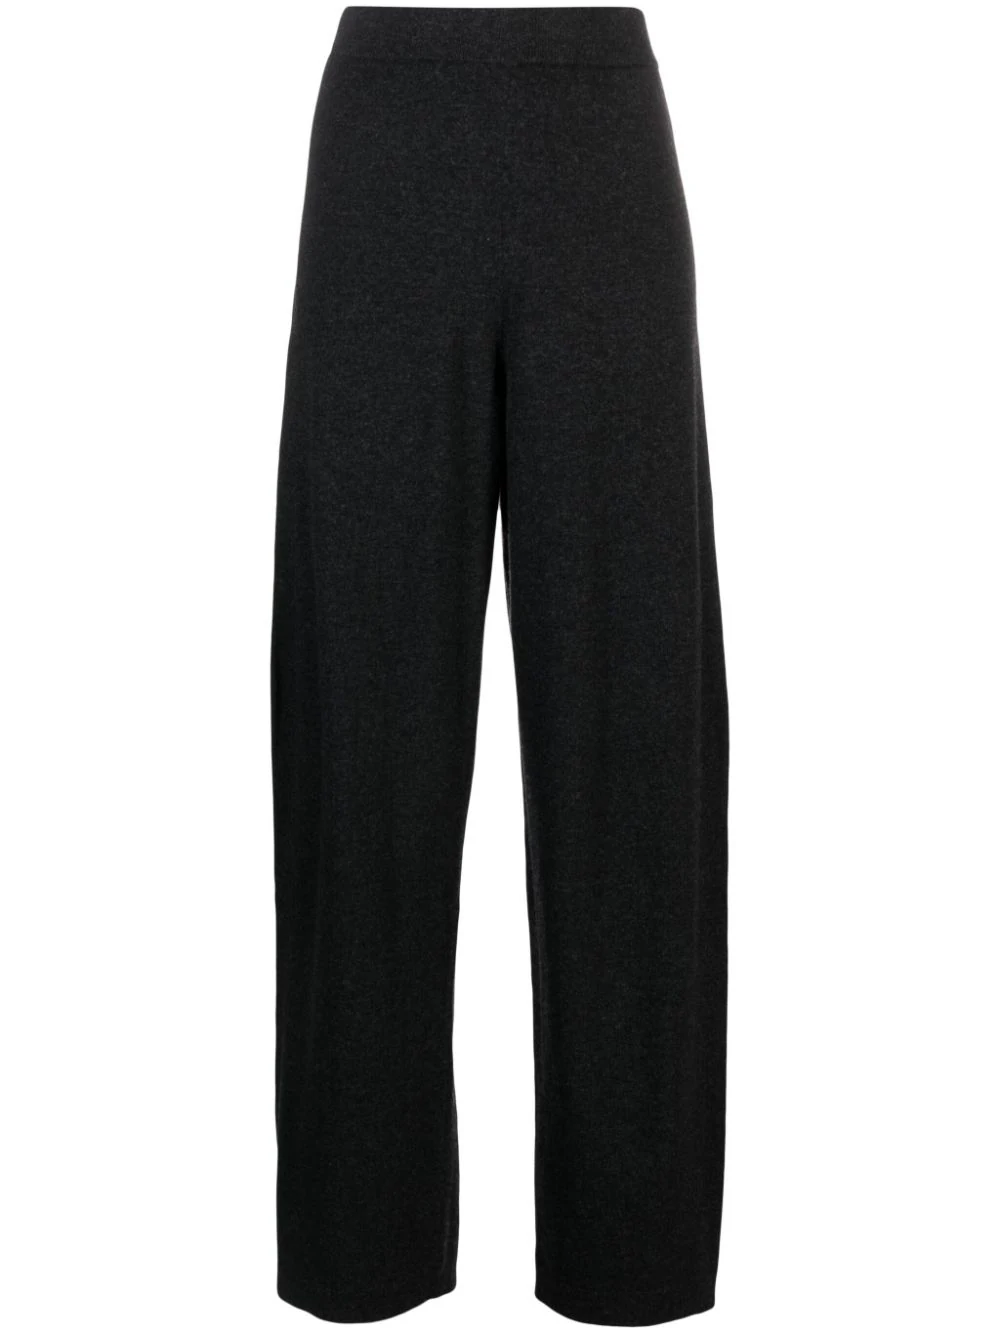 LEMAIRE SOFT CURVED TROUSERS IN WOOL BLEND